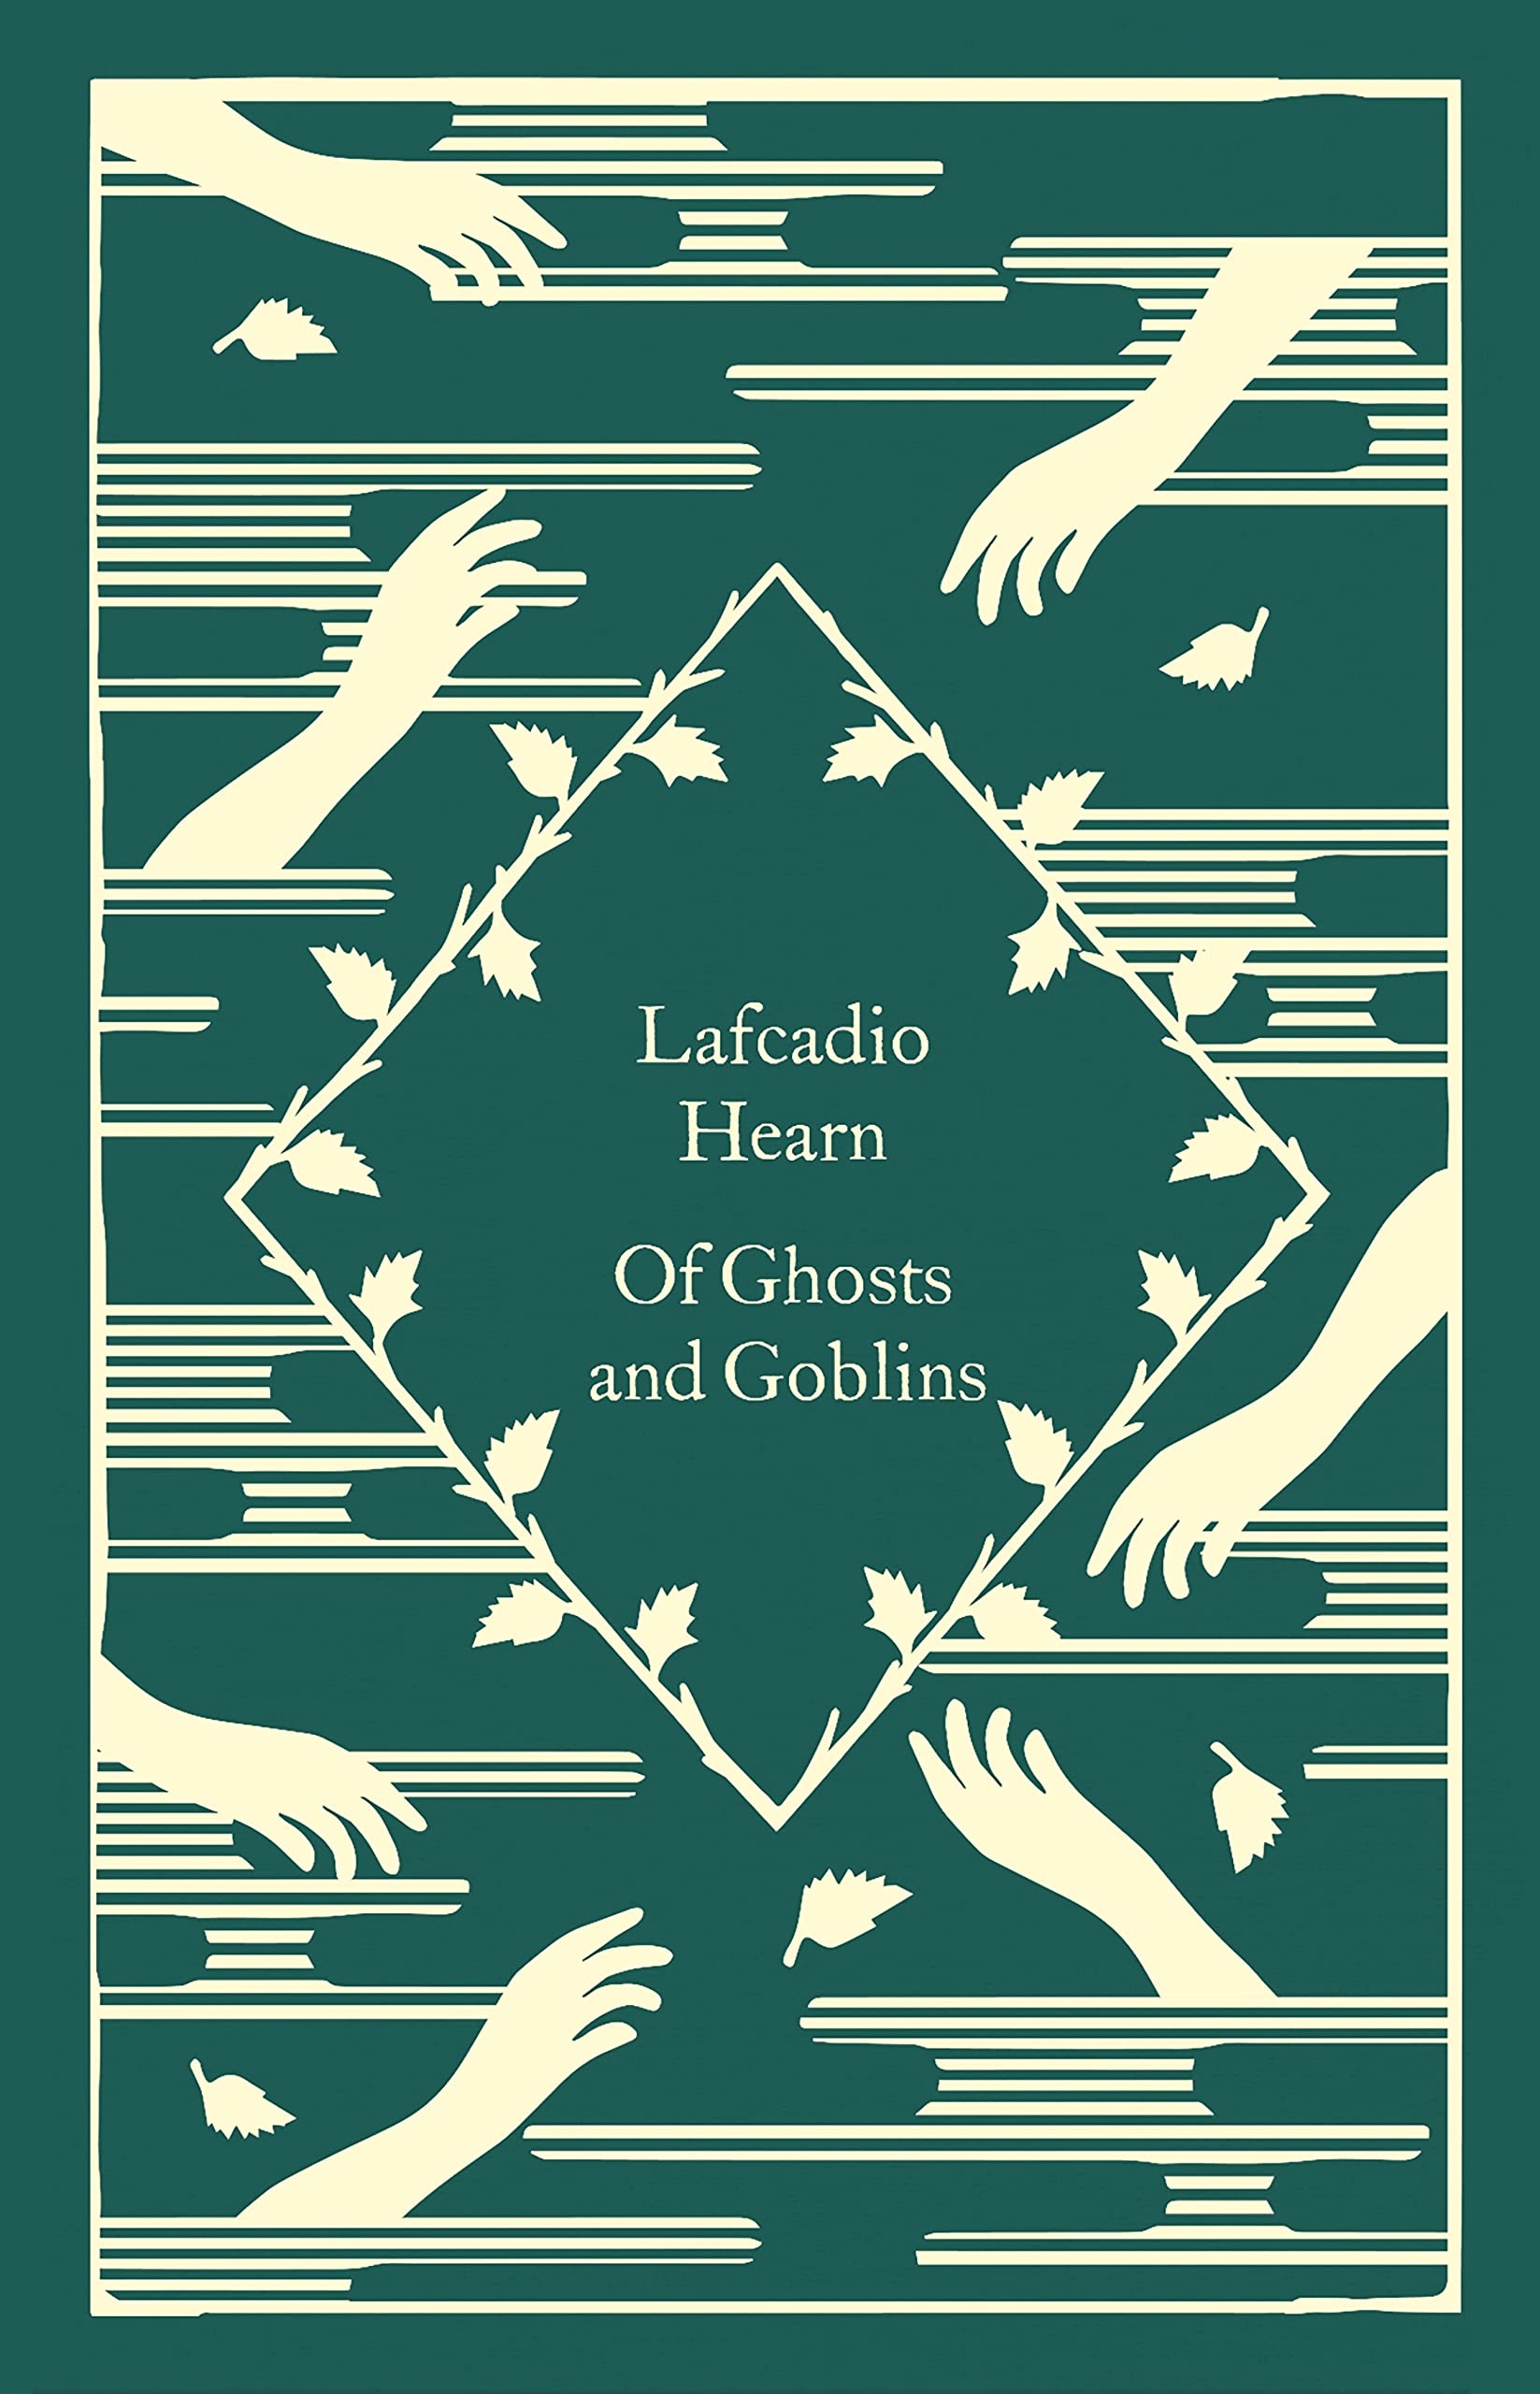 Of Ghosts and Goblins | Lafcadio Hearn